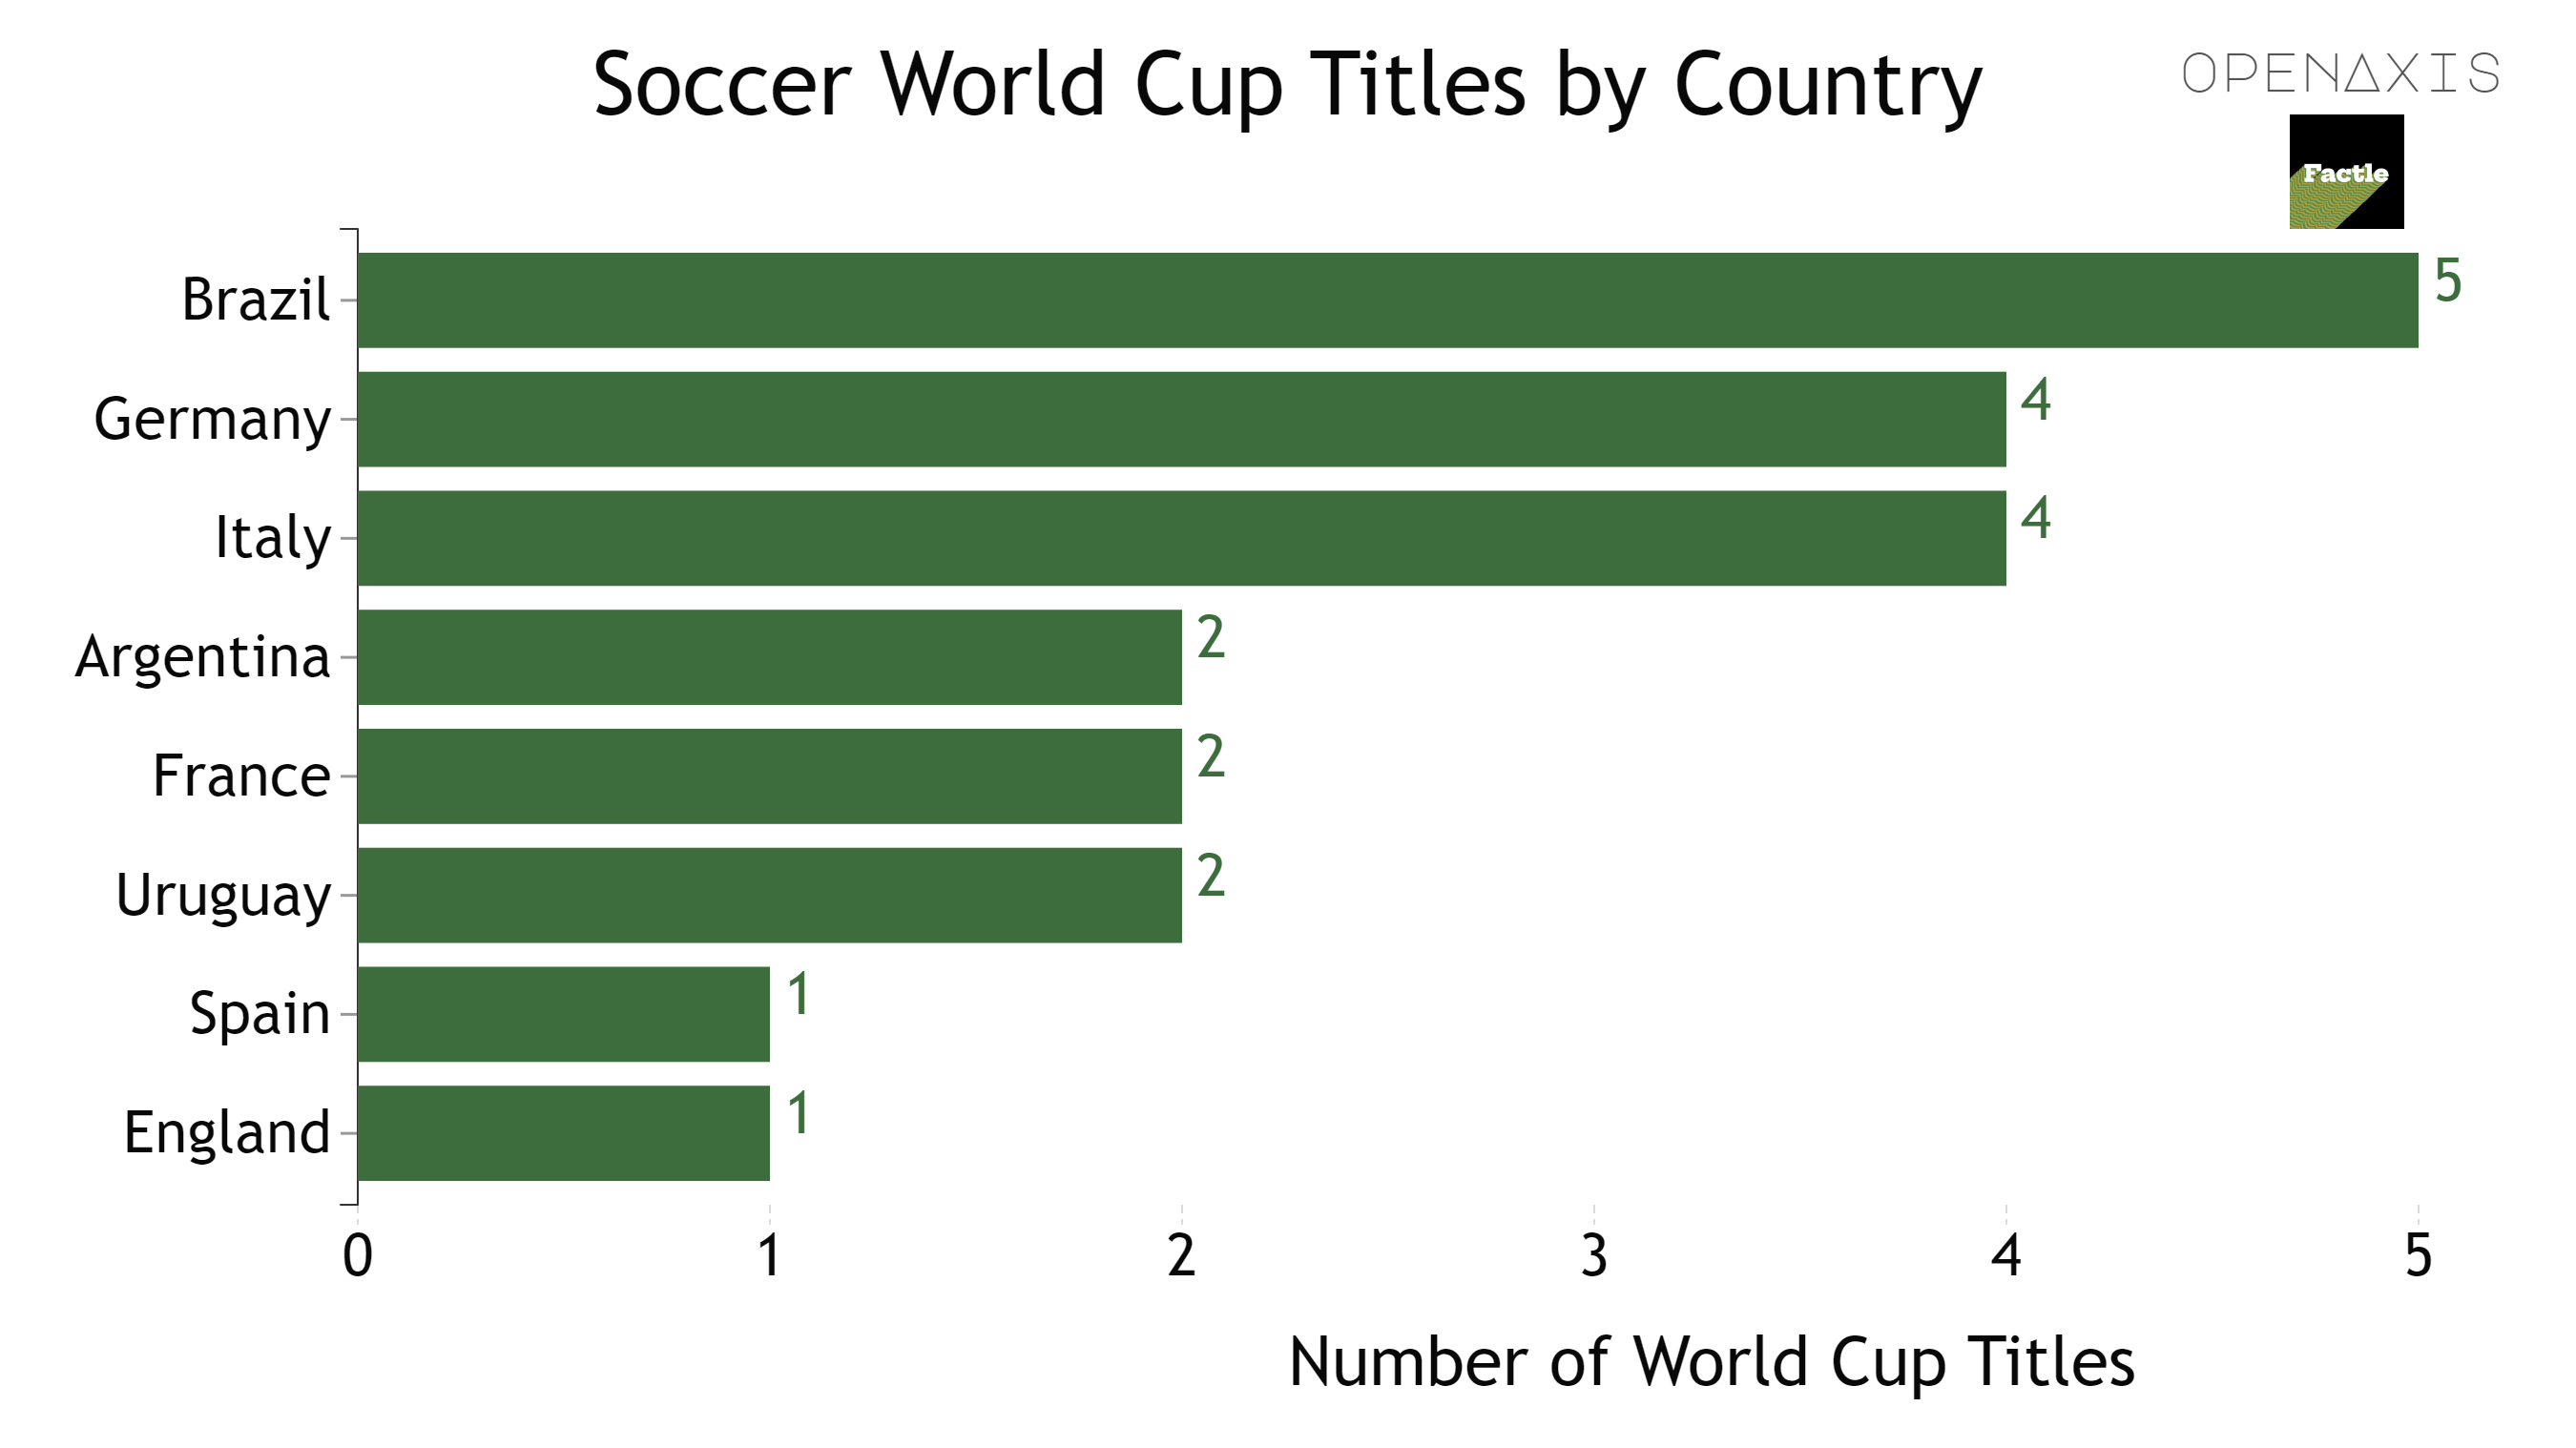 "Soccer World Cup Titles by Country"